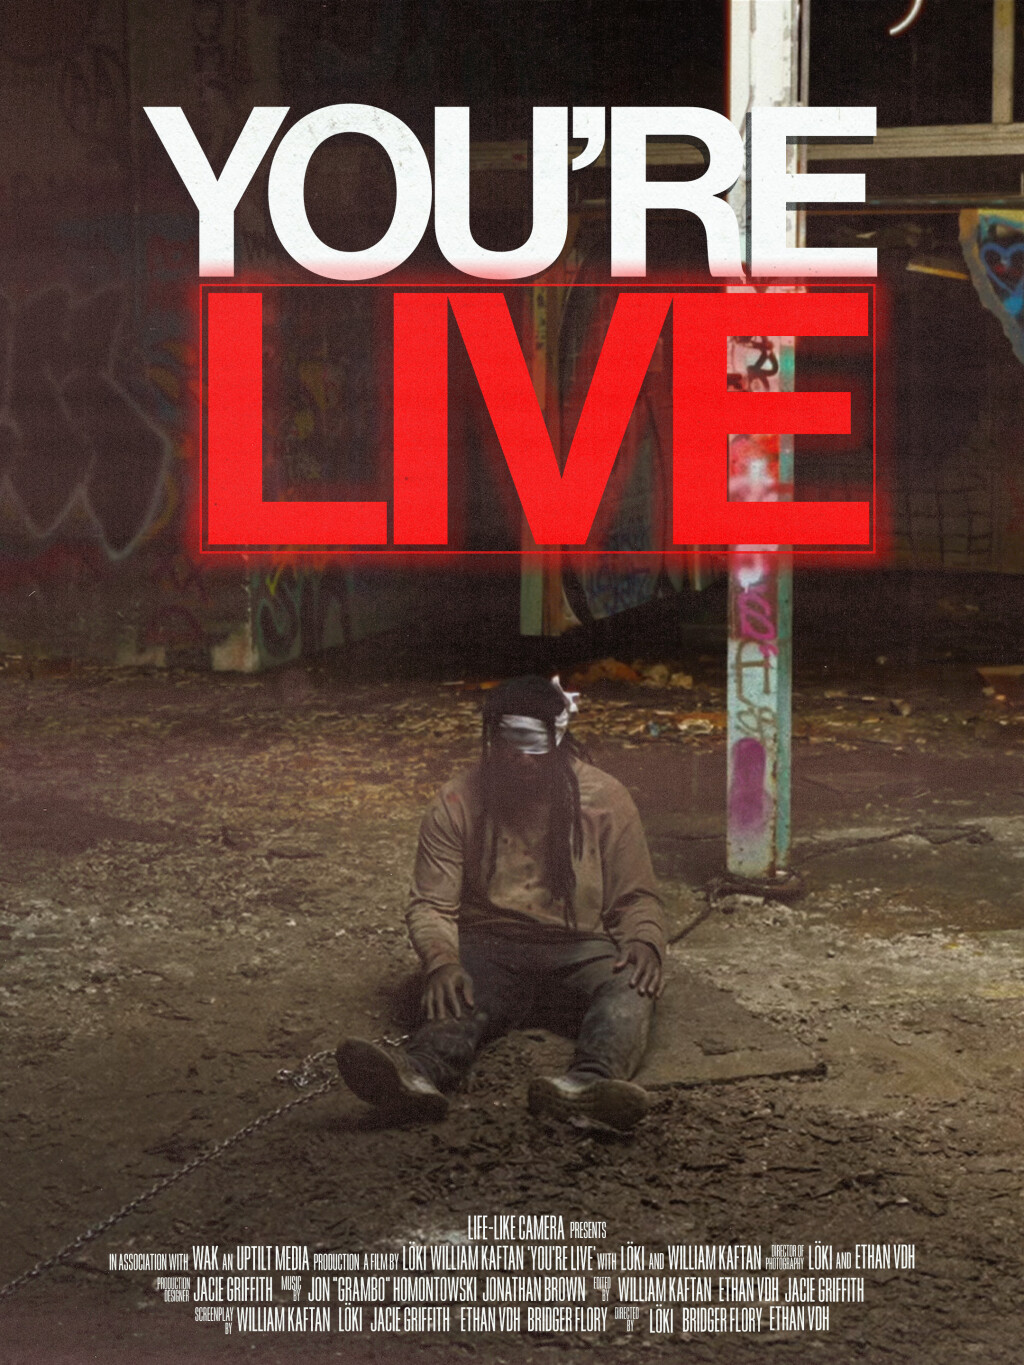 Filmposter for You're Live